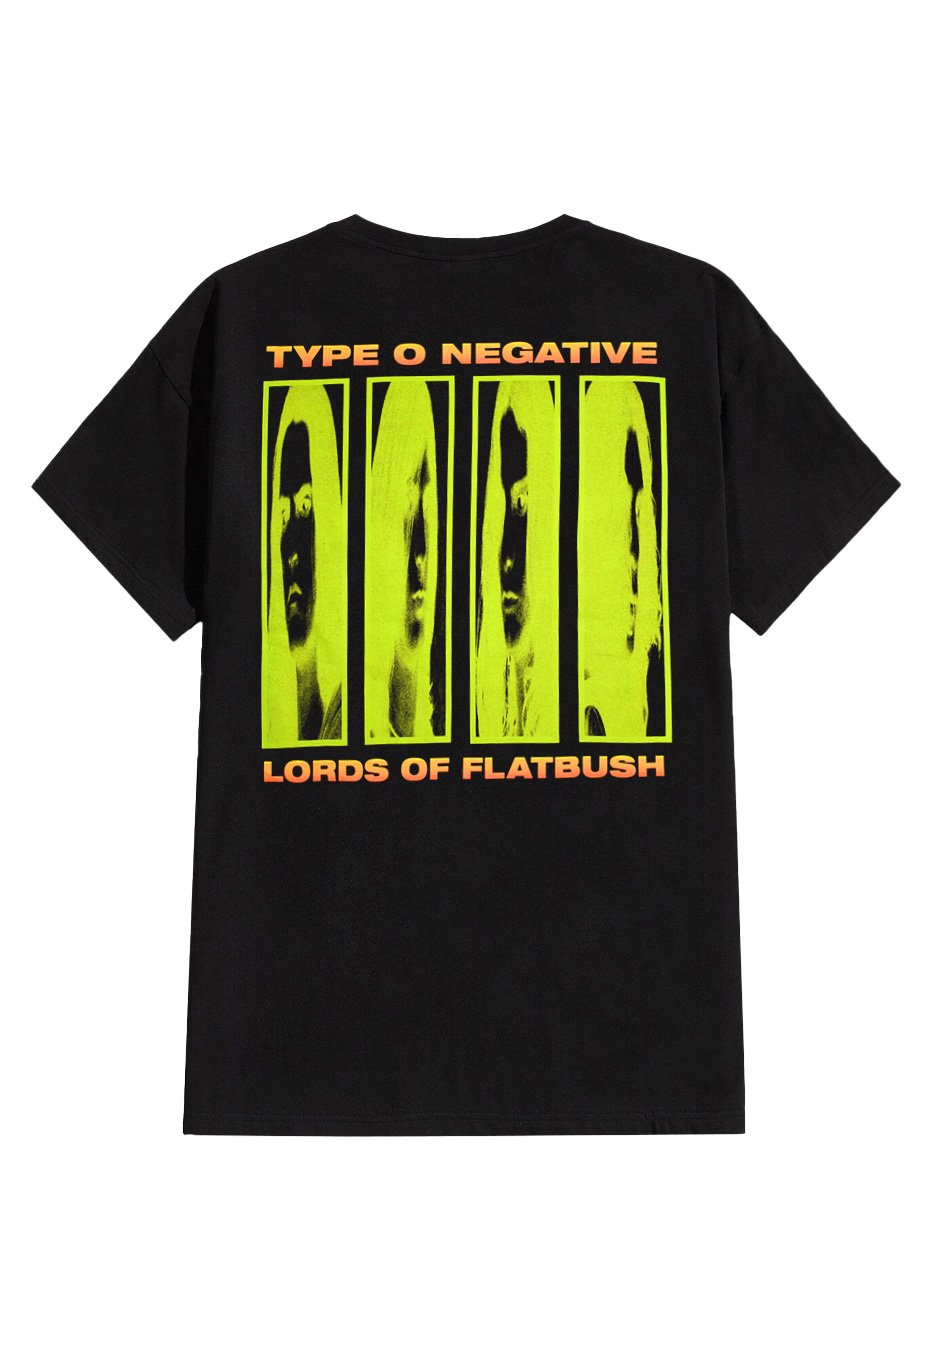 Type O Negative - Suspended In Dusk - T-Shirt